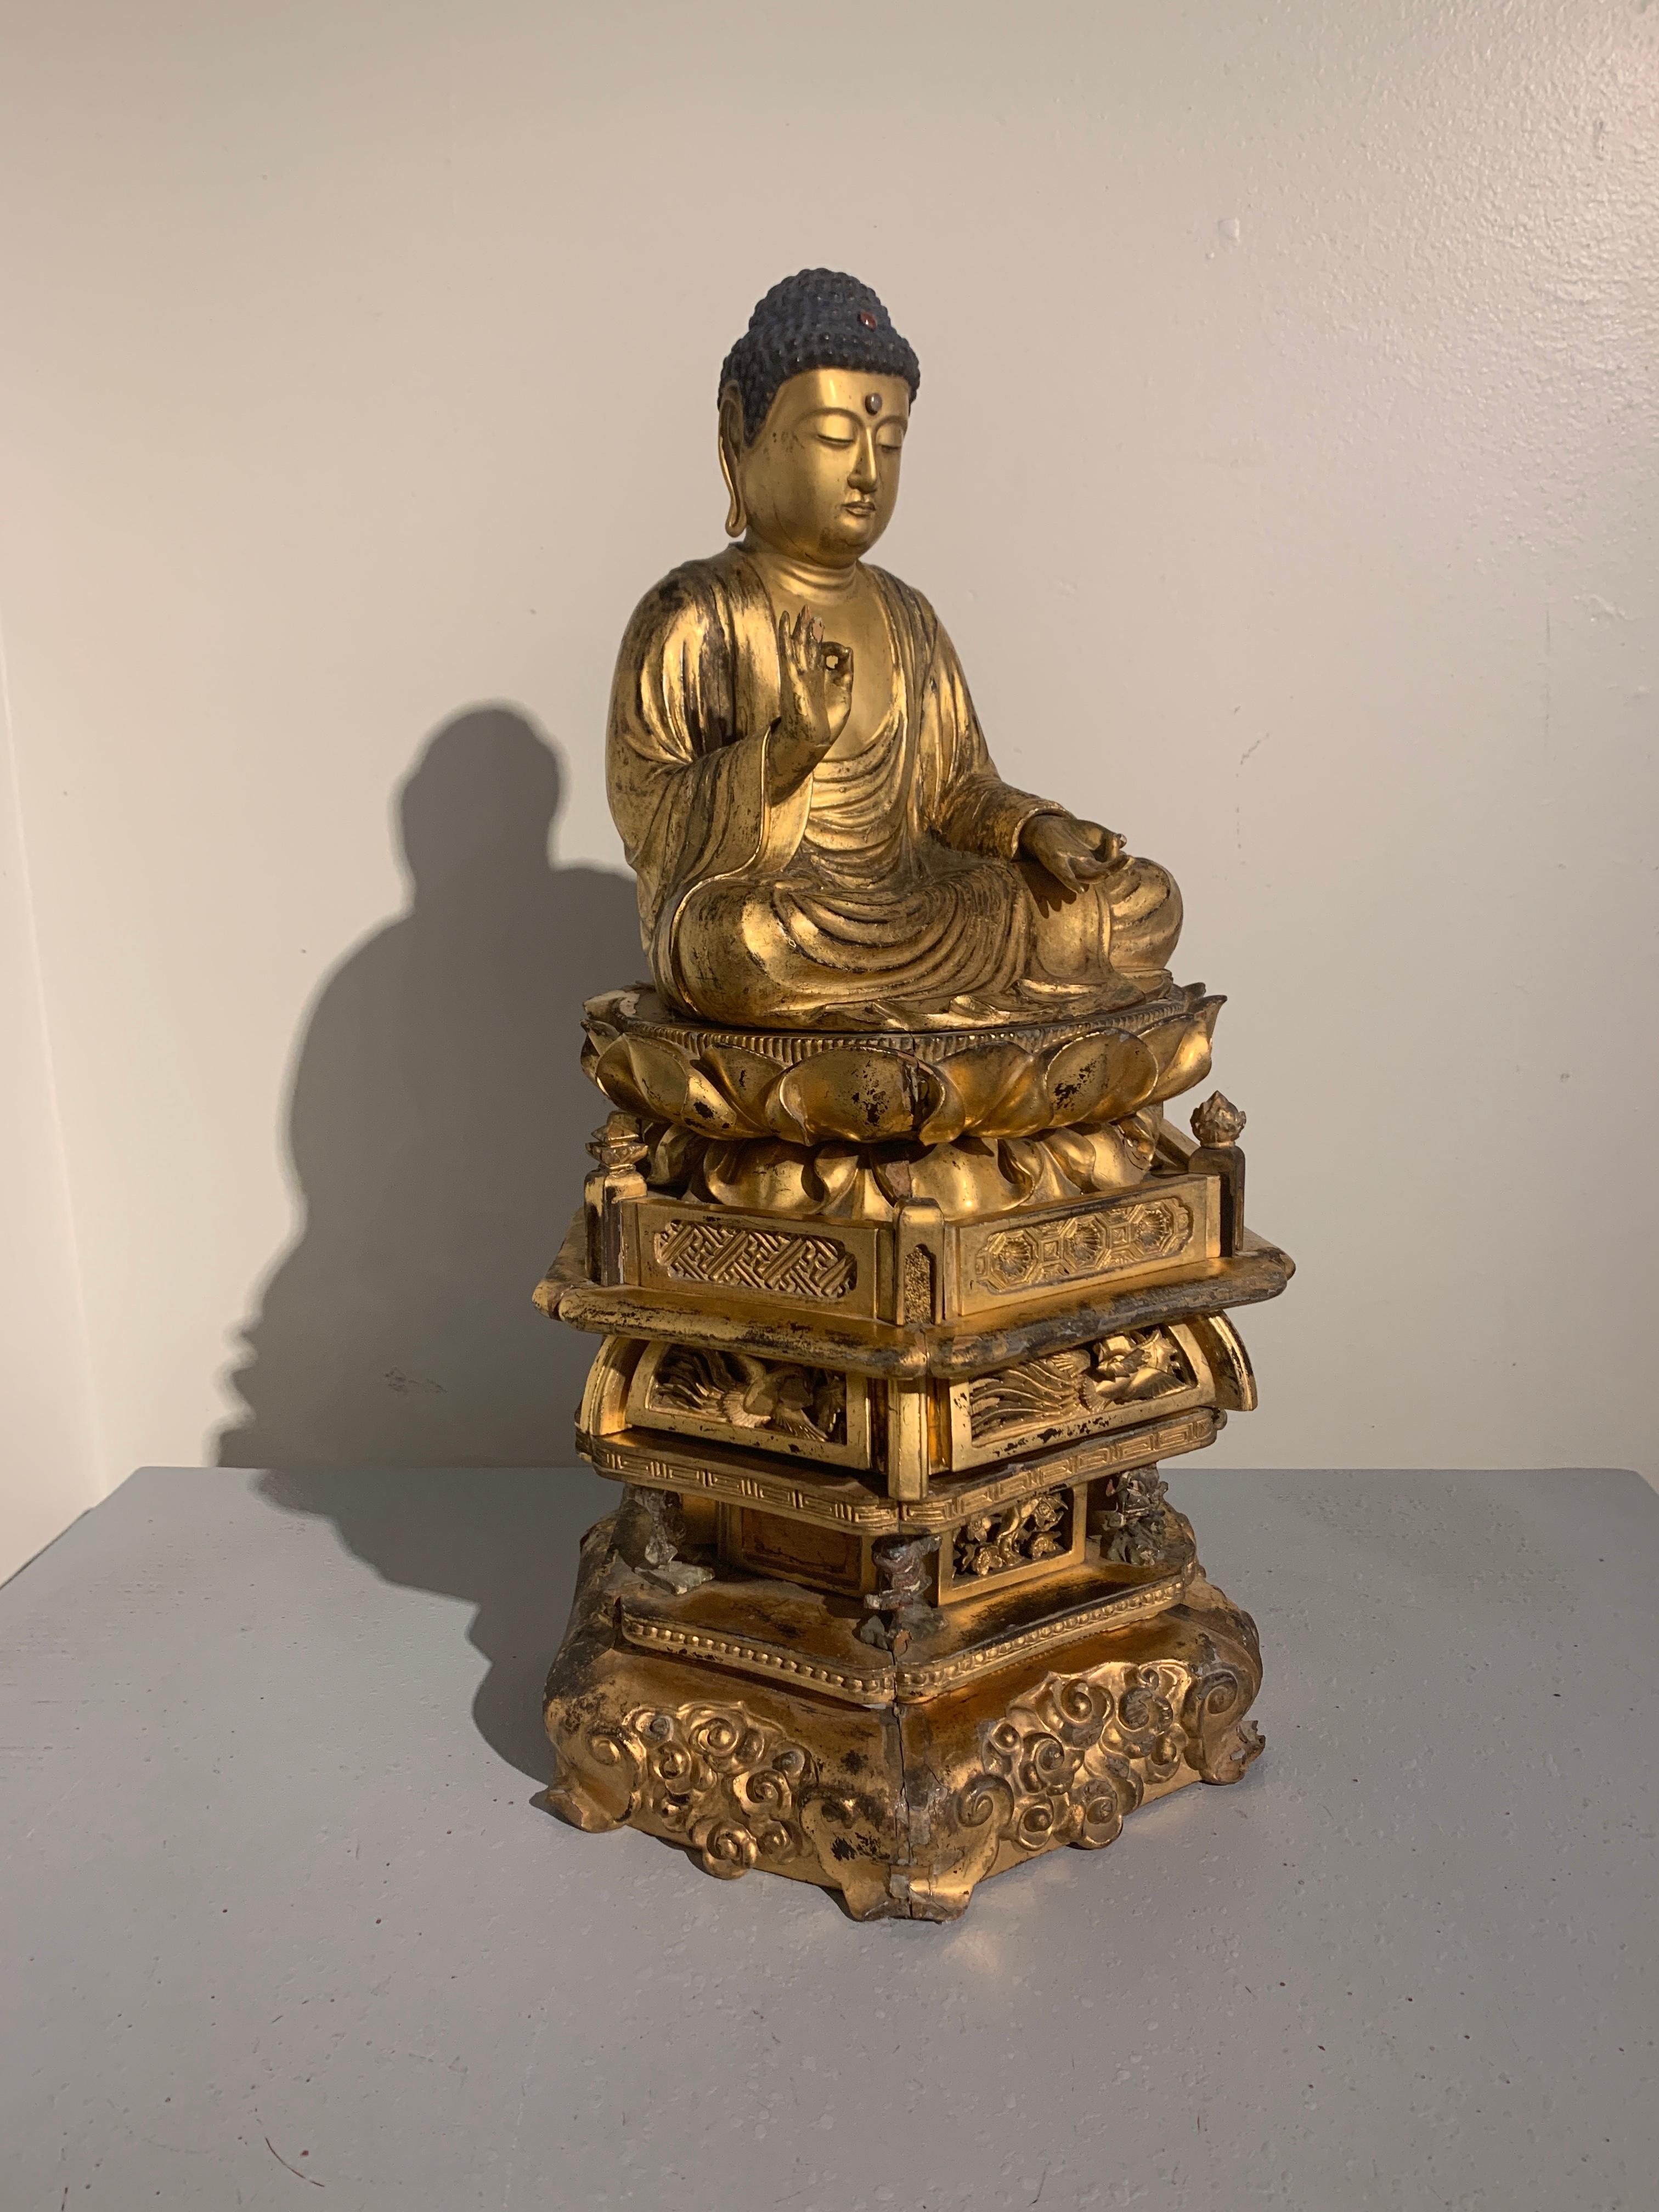 A magnificent Japanese carved and giltwood figure of the Medicine Buddha, Yakushi Nyorai, seated upon a double lotus pedestal supported by a multi-tiered stand, mid-Edo Period, late 18th century.

Yakushi Nyorai, as the Medicine Buddha is known in